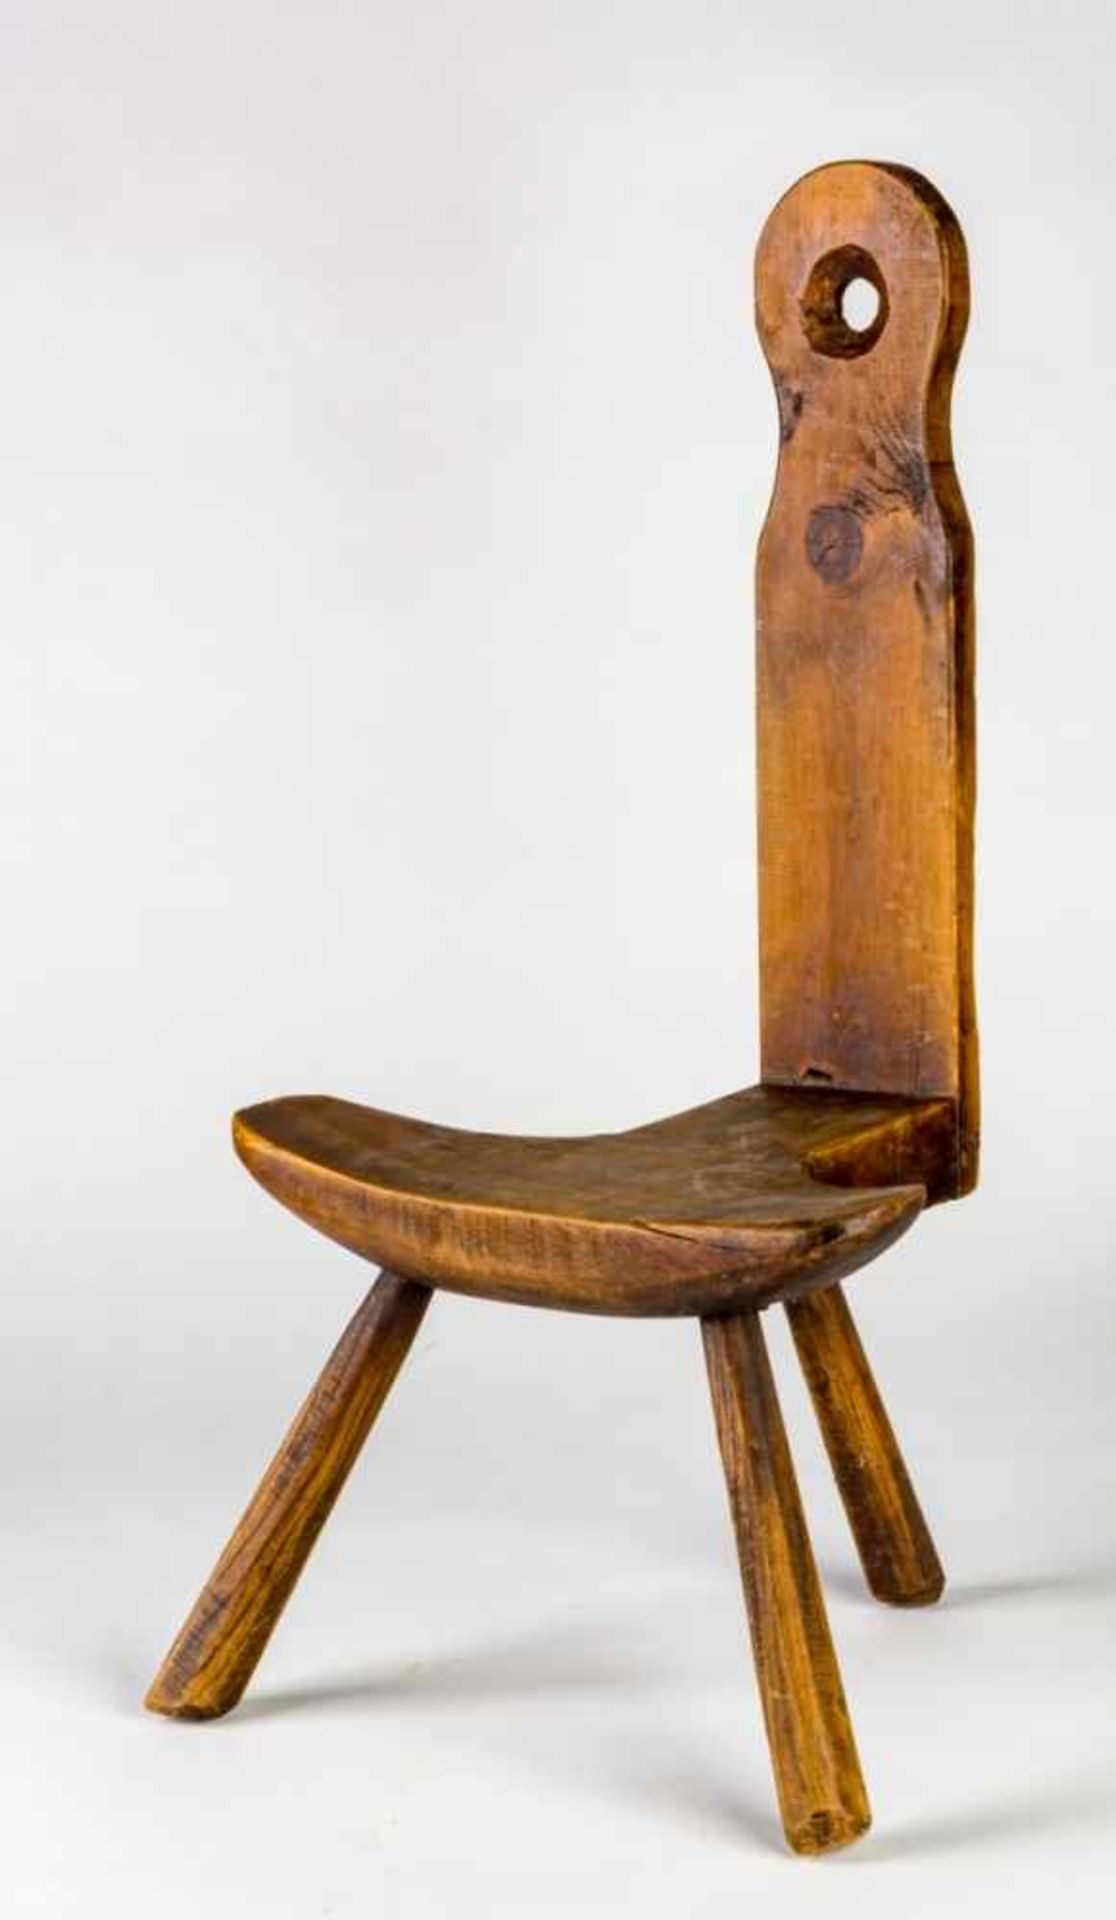 Hocker in Form eines StuhlsHolz, 19. Jh.72 cm hochStool in the shape of a chair, wood, 19th c., 72